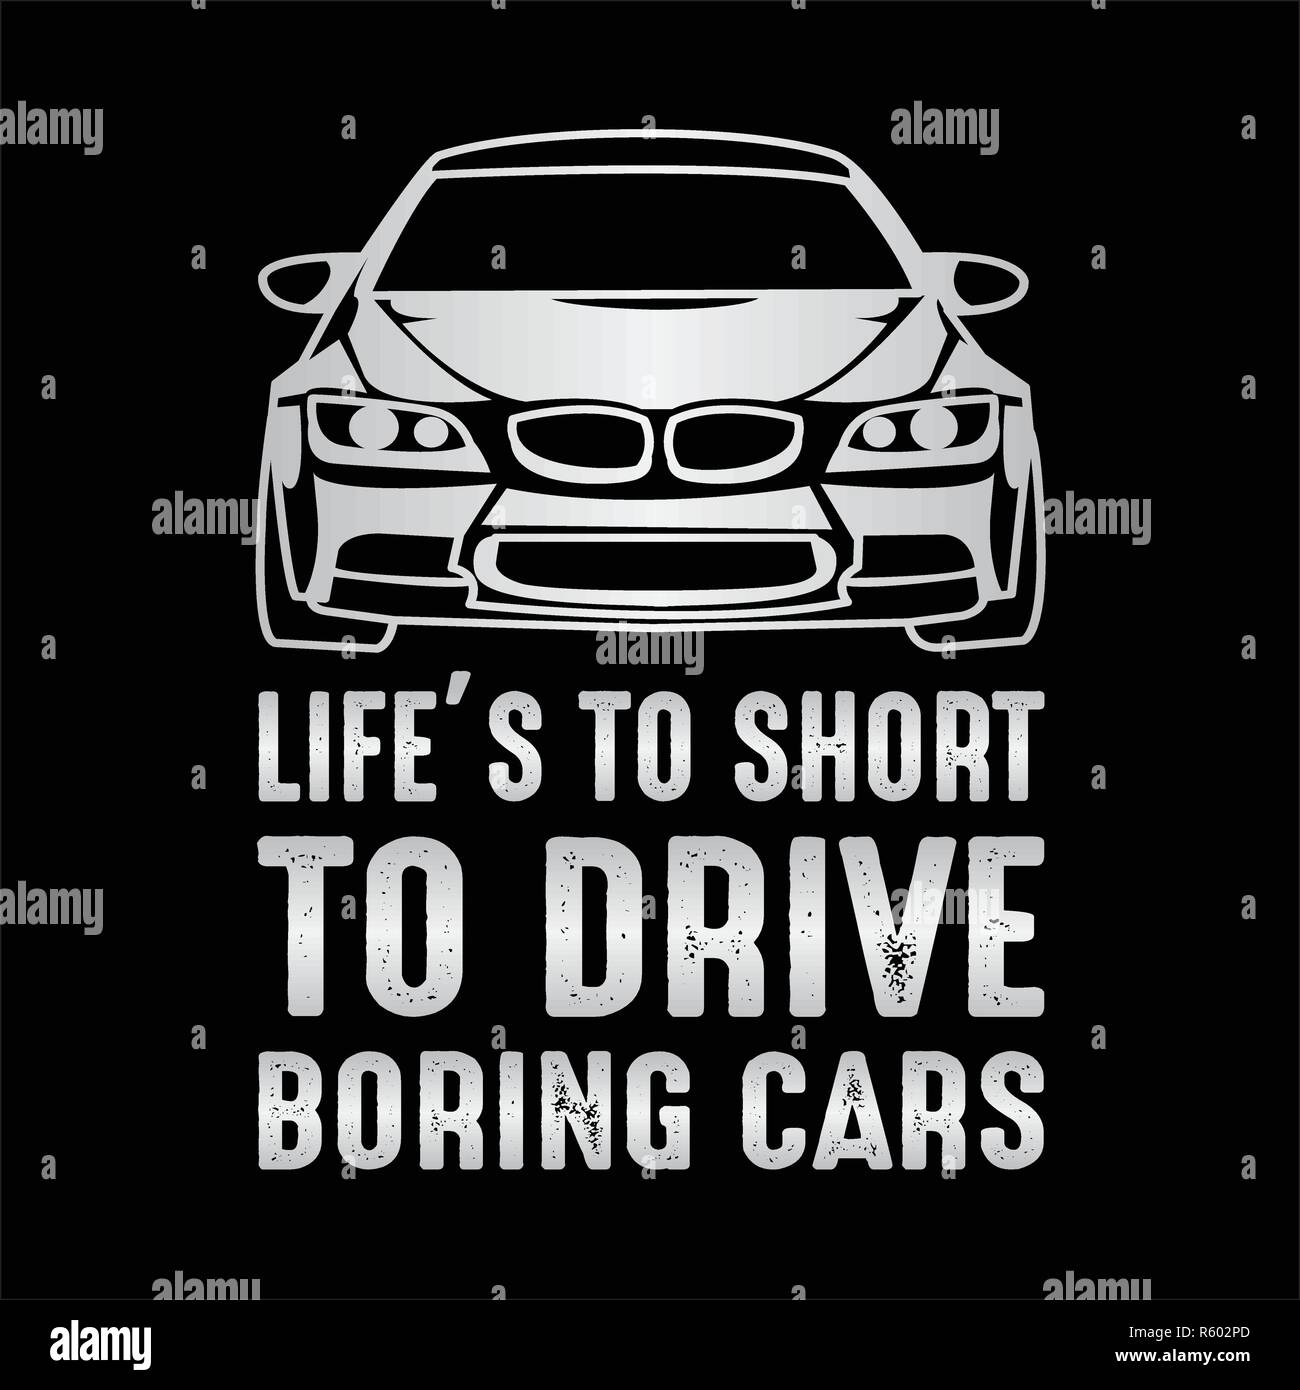 Car Quote And Saying Life Is To Short To Drive Boring Cars Stock Vector Image Art Alamy